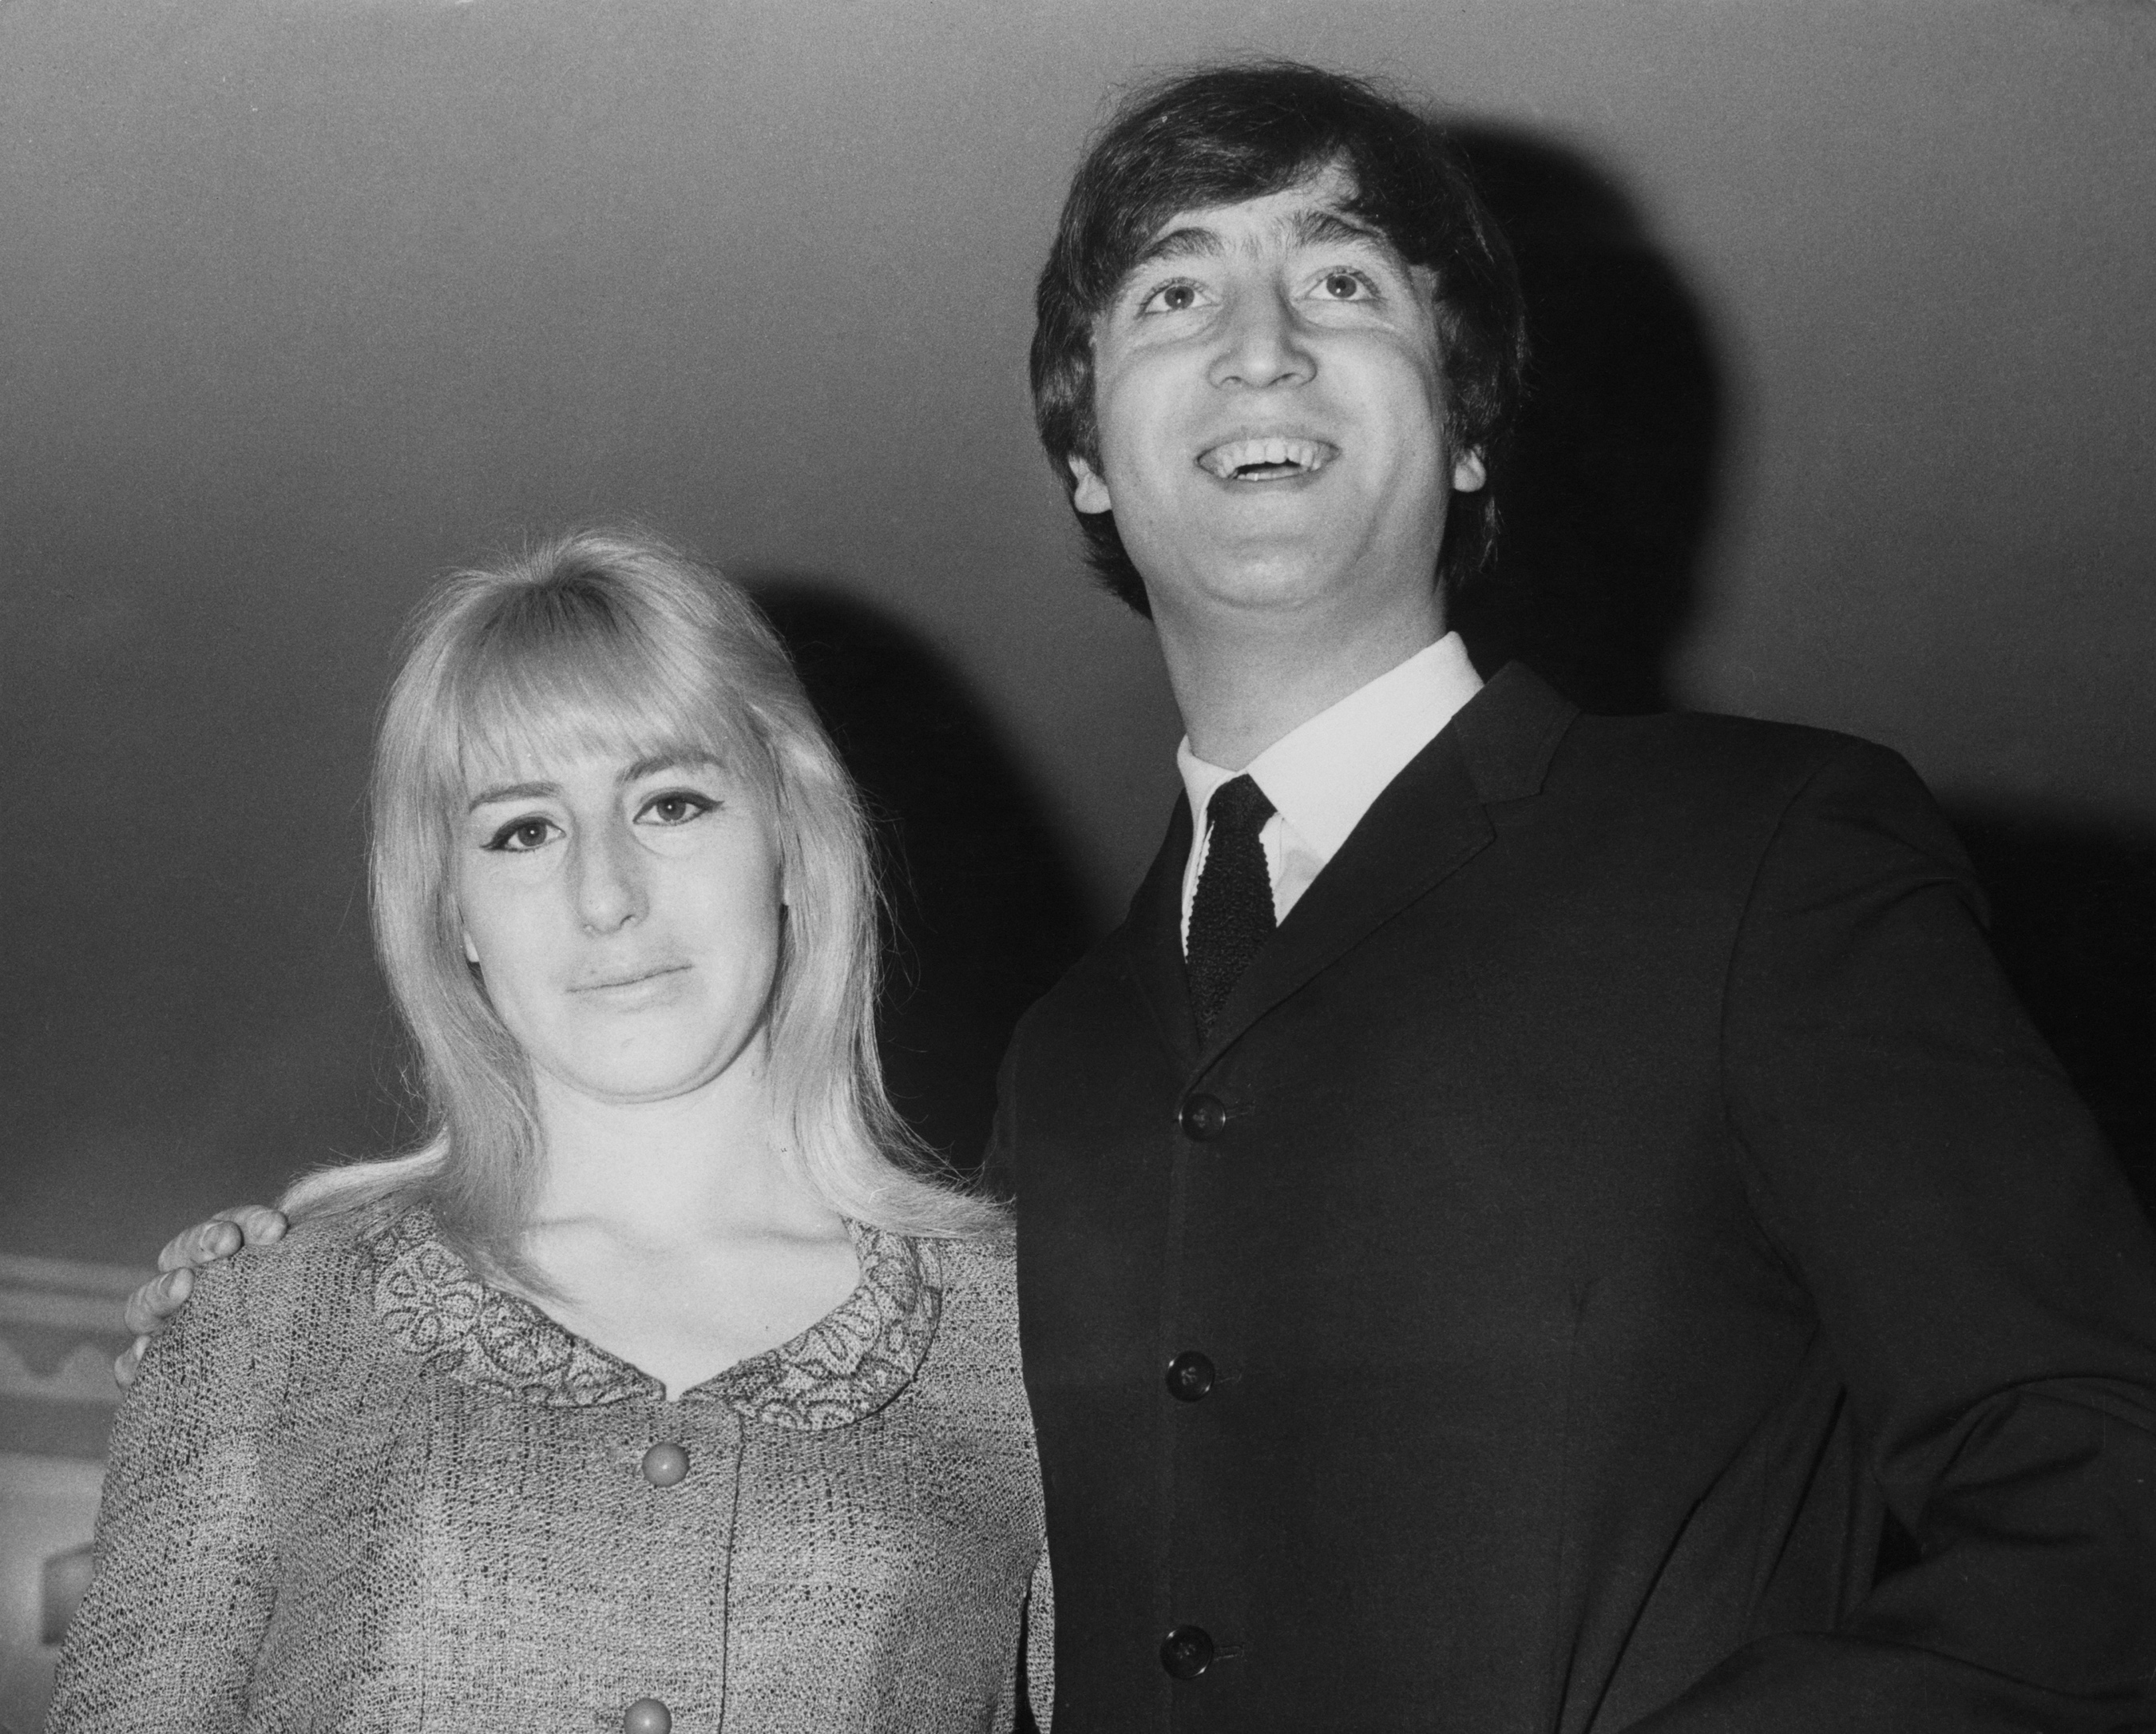 Musician, singer and songwriter John Lennon (1940 - 1980) of British rock group the Beatles with his first wife Cynthia 